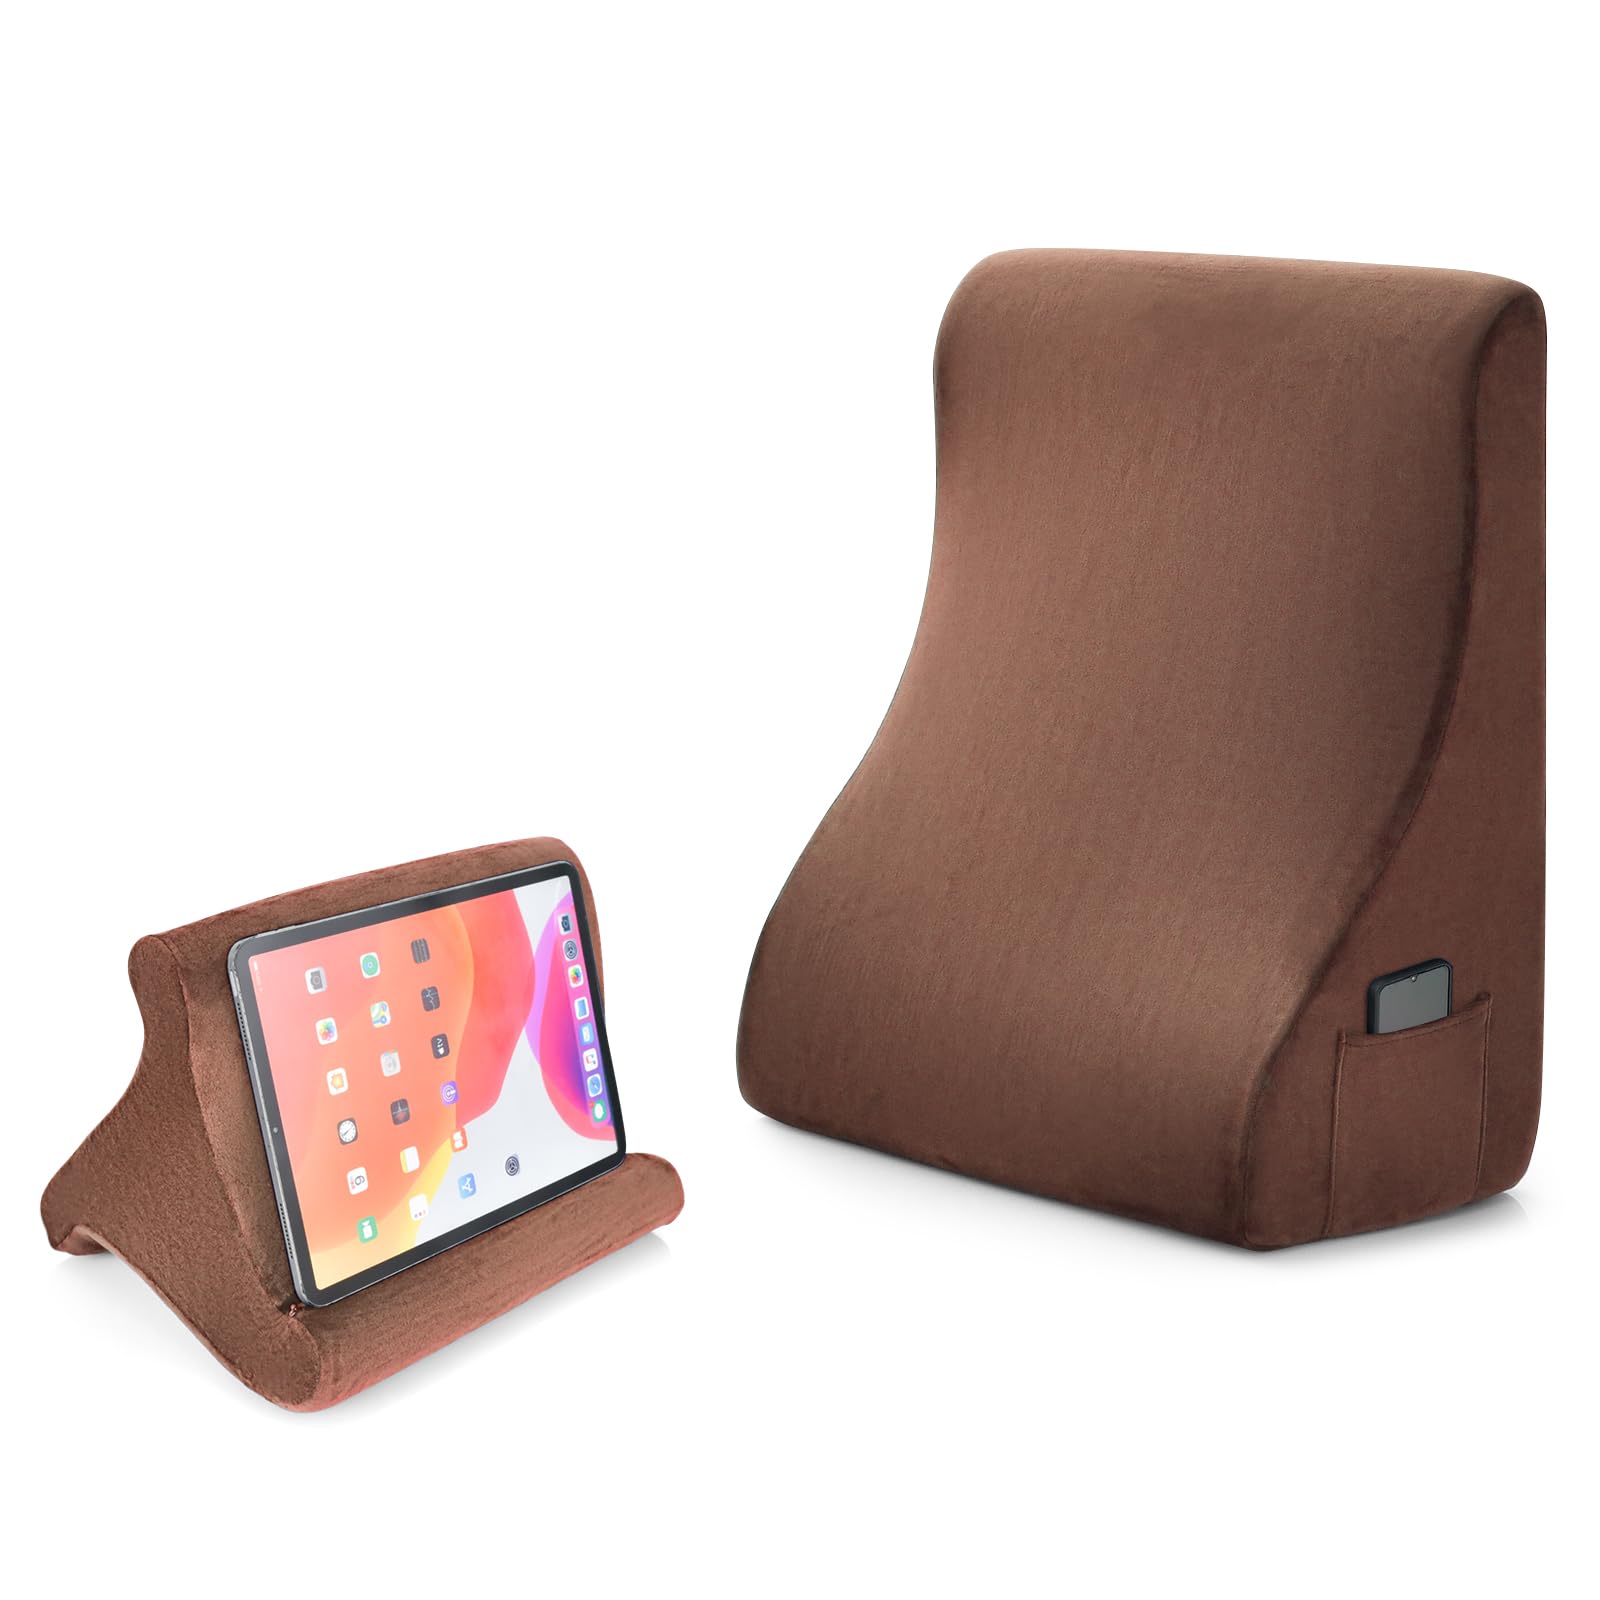 Giantex Wedge Pillow Set, Bed Wedge Pillow with Tablet Pillow Stand,High Resilience Foam